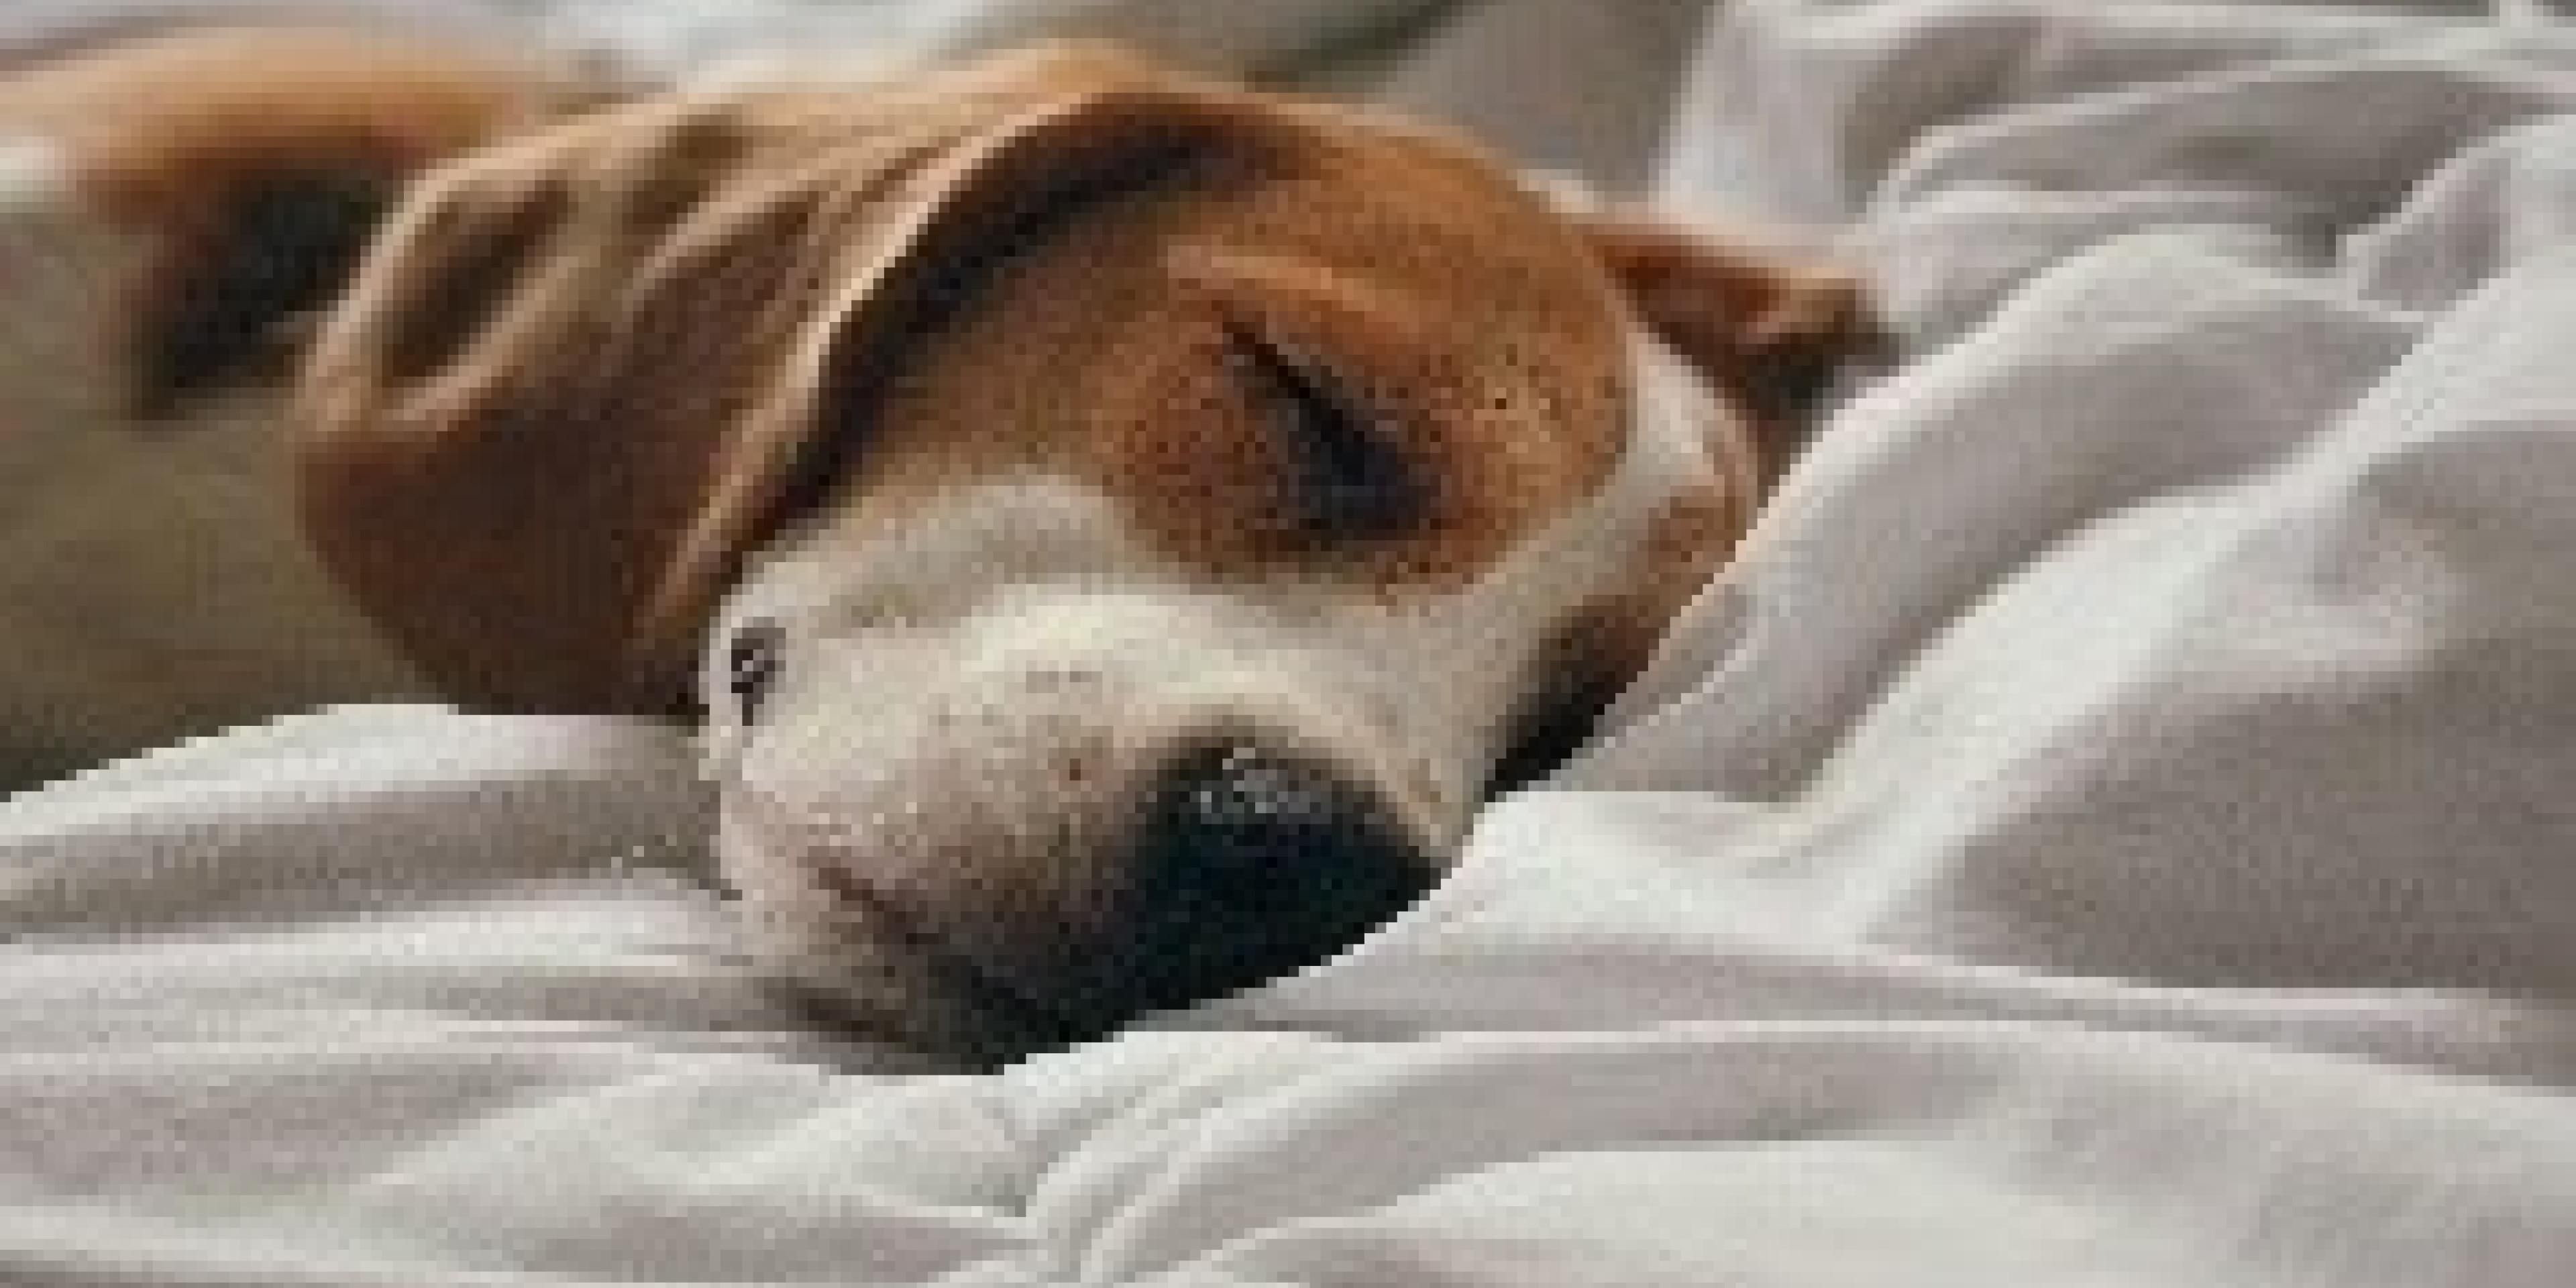 Traveling with a furry friend?  Pets are always welcome here!  Ask about our special pet rate of $30 per night.